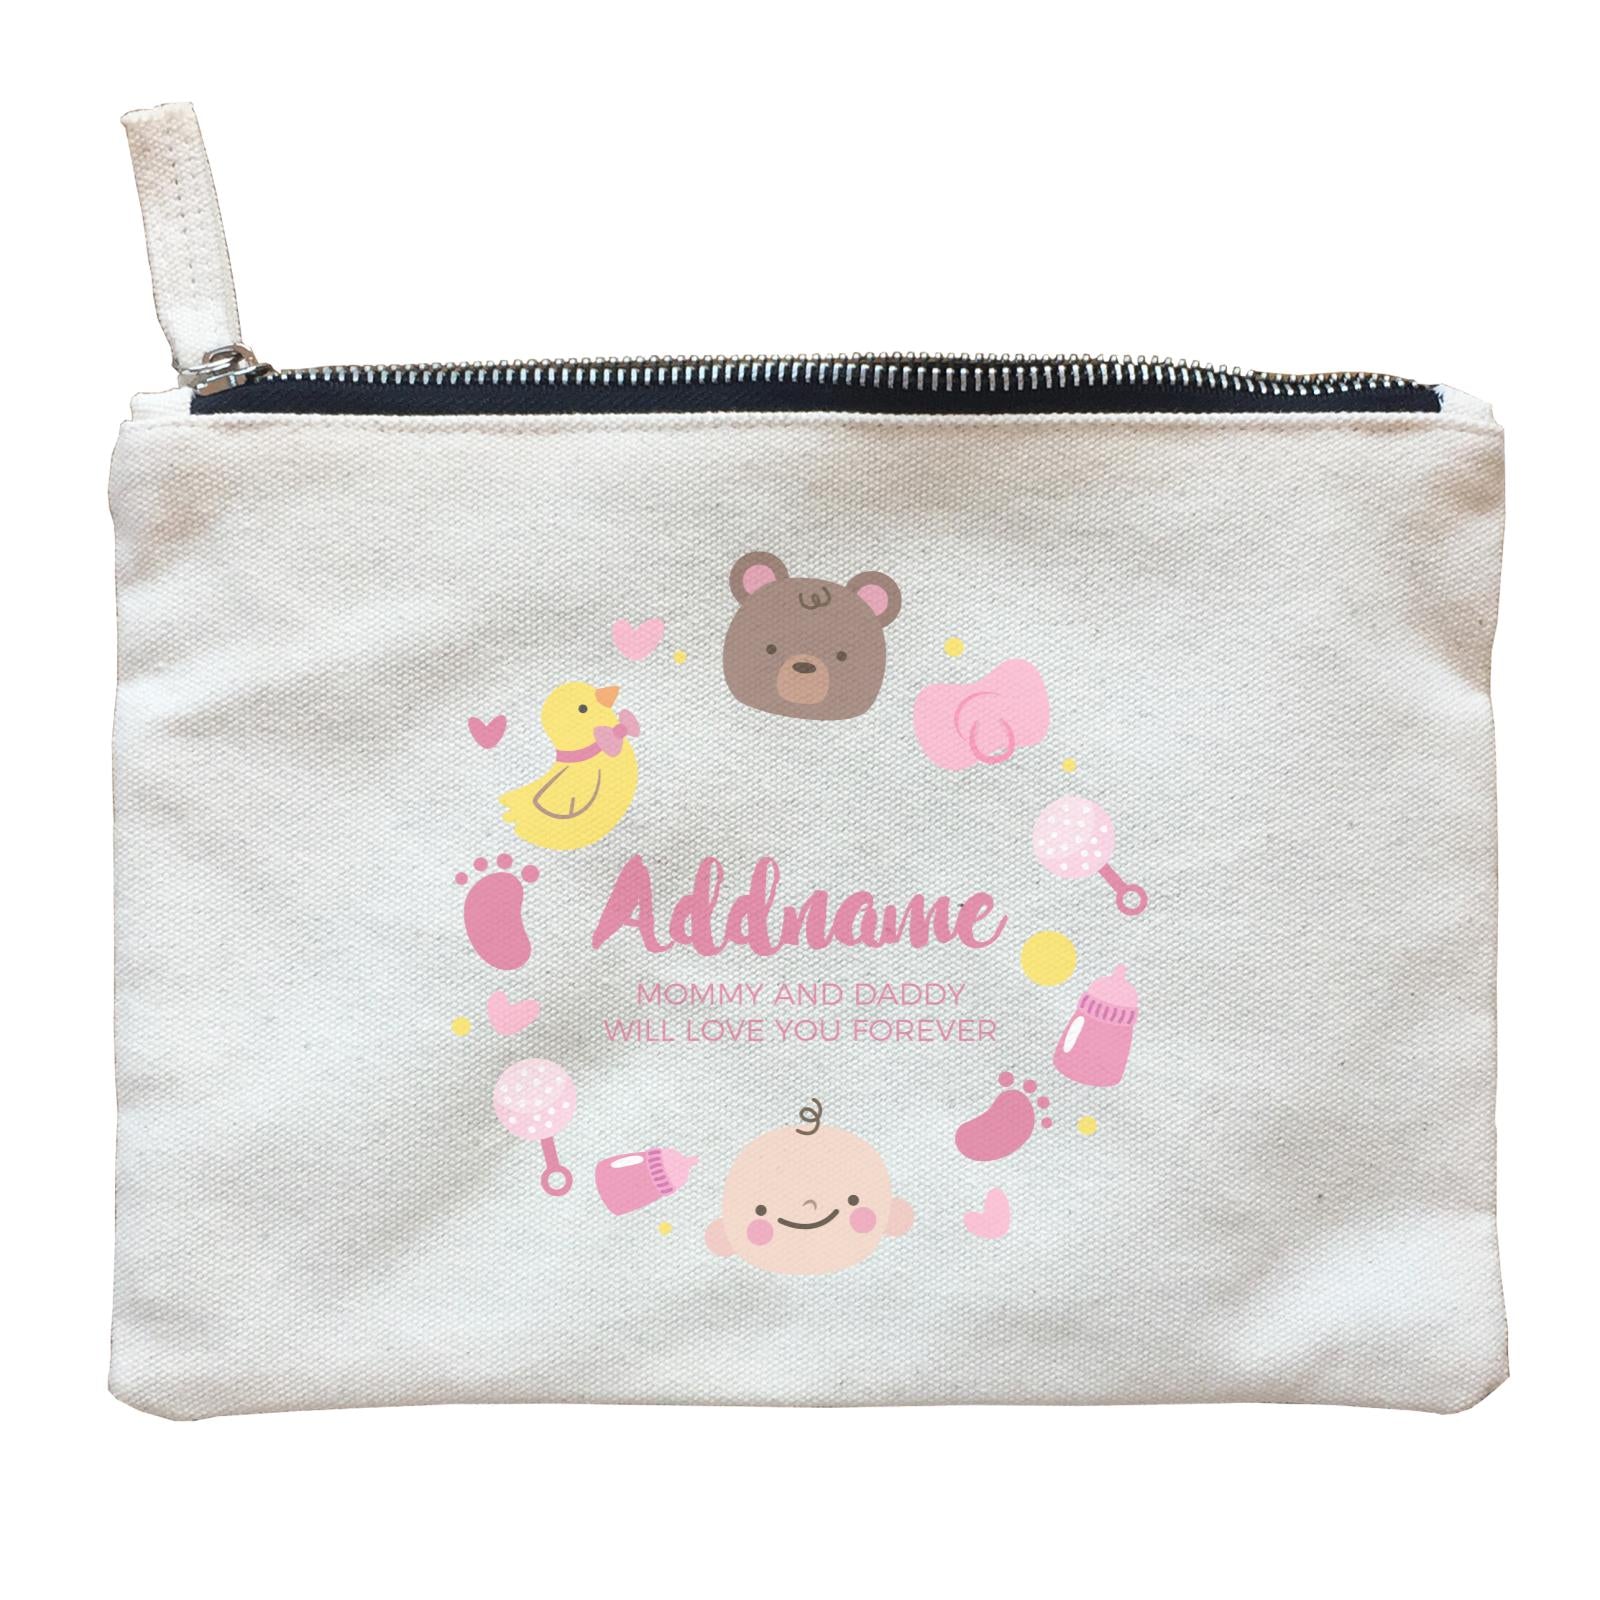 Cute Baby Girl Elements Personalizable with Name and Text Zipper Pouch